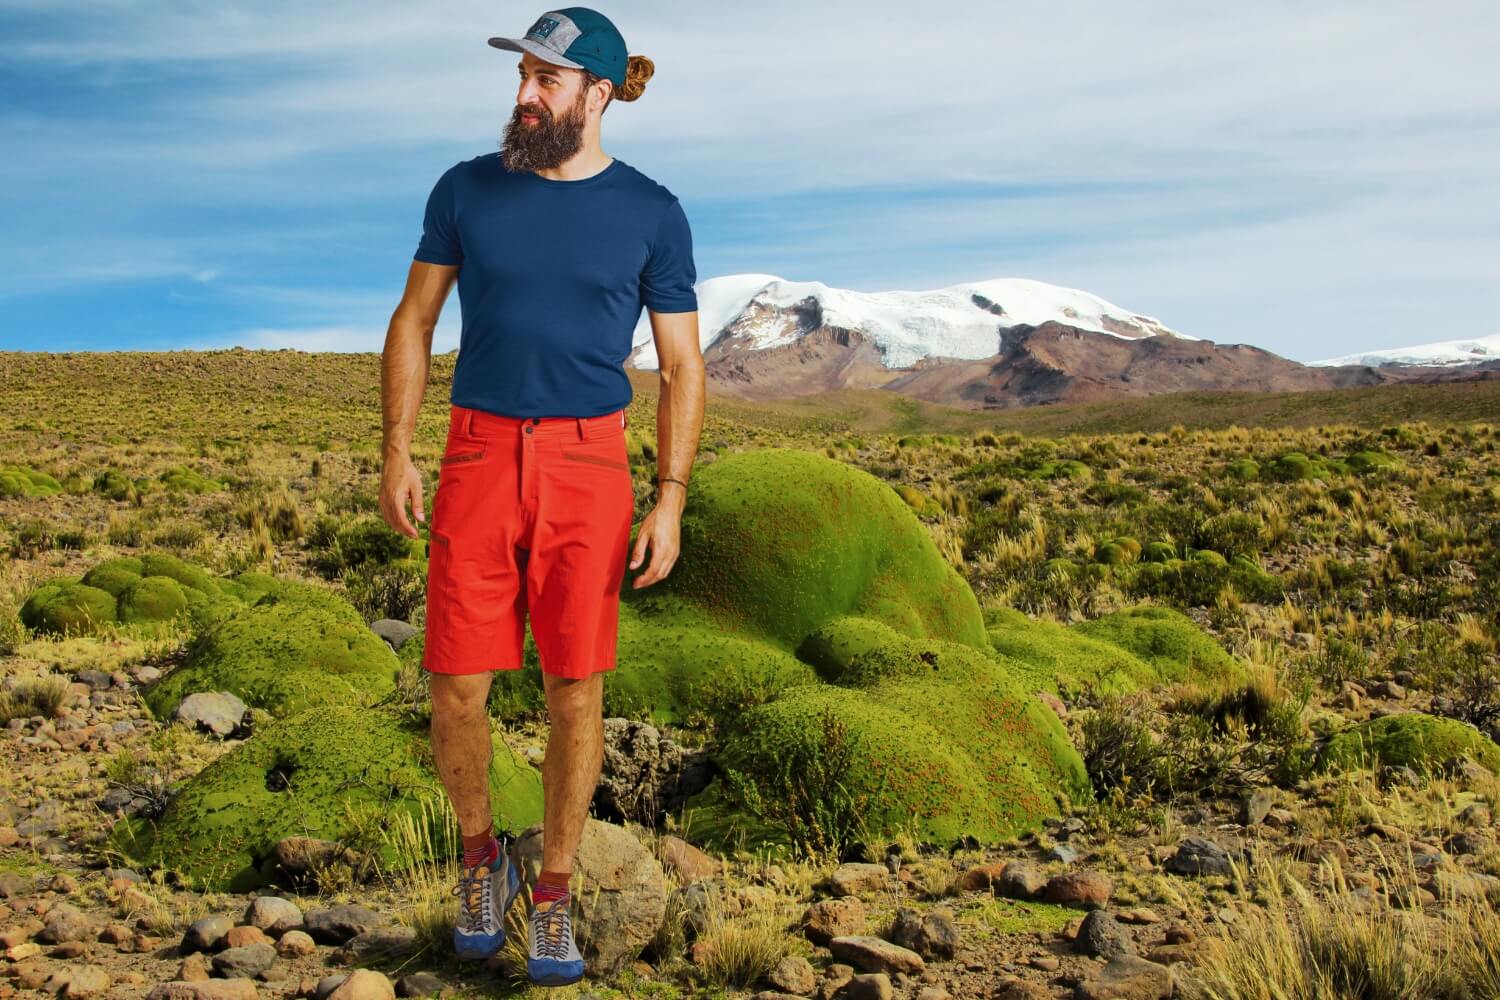 THE MOST IMPORTANT FEATURES OF GOOD HIKING PANTS